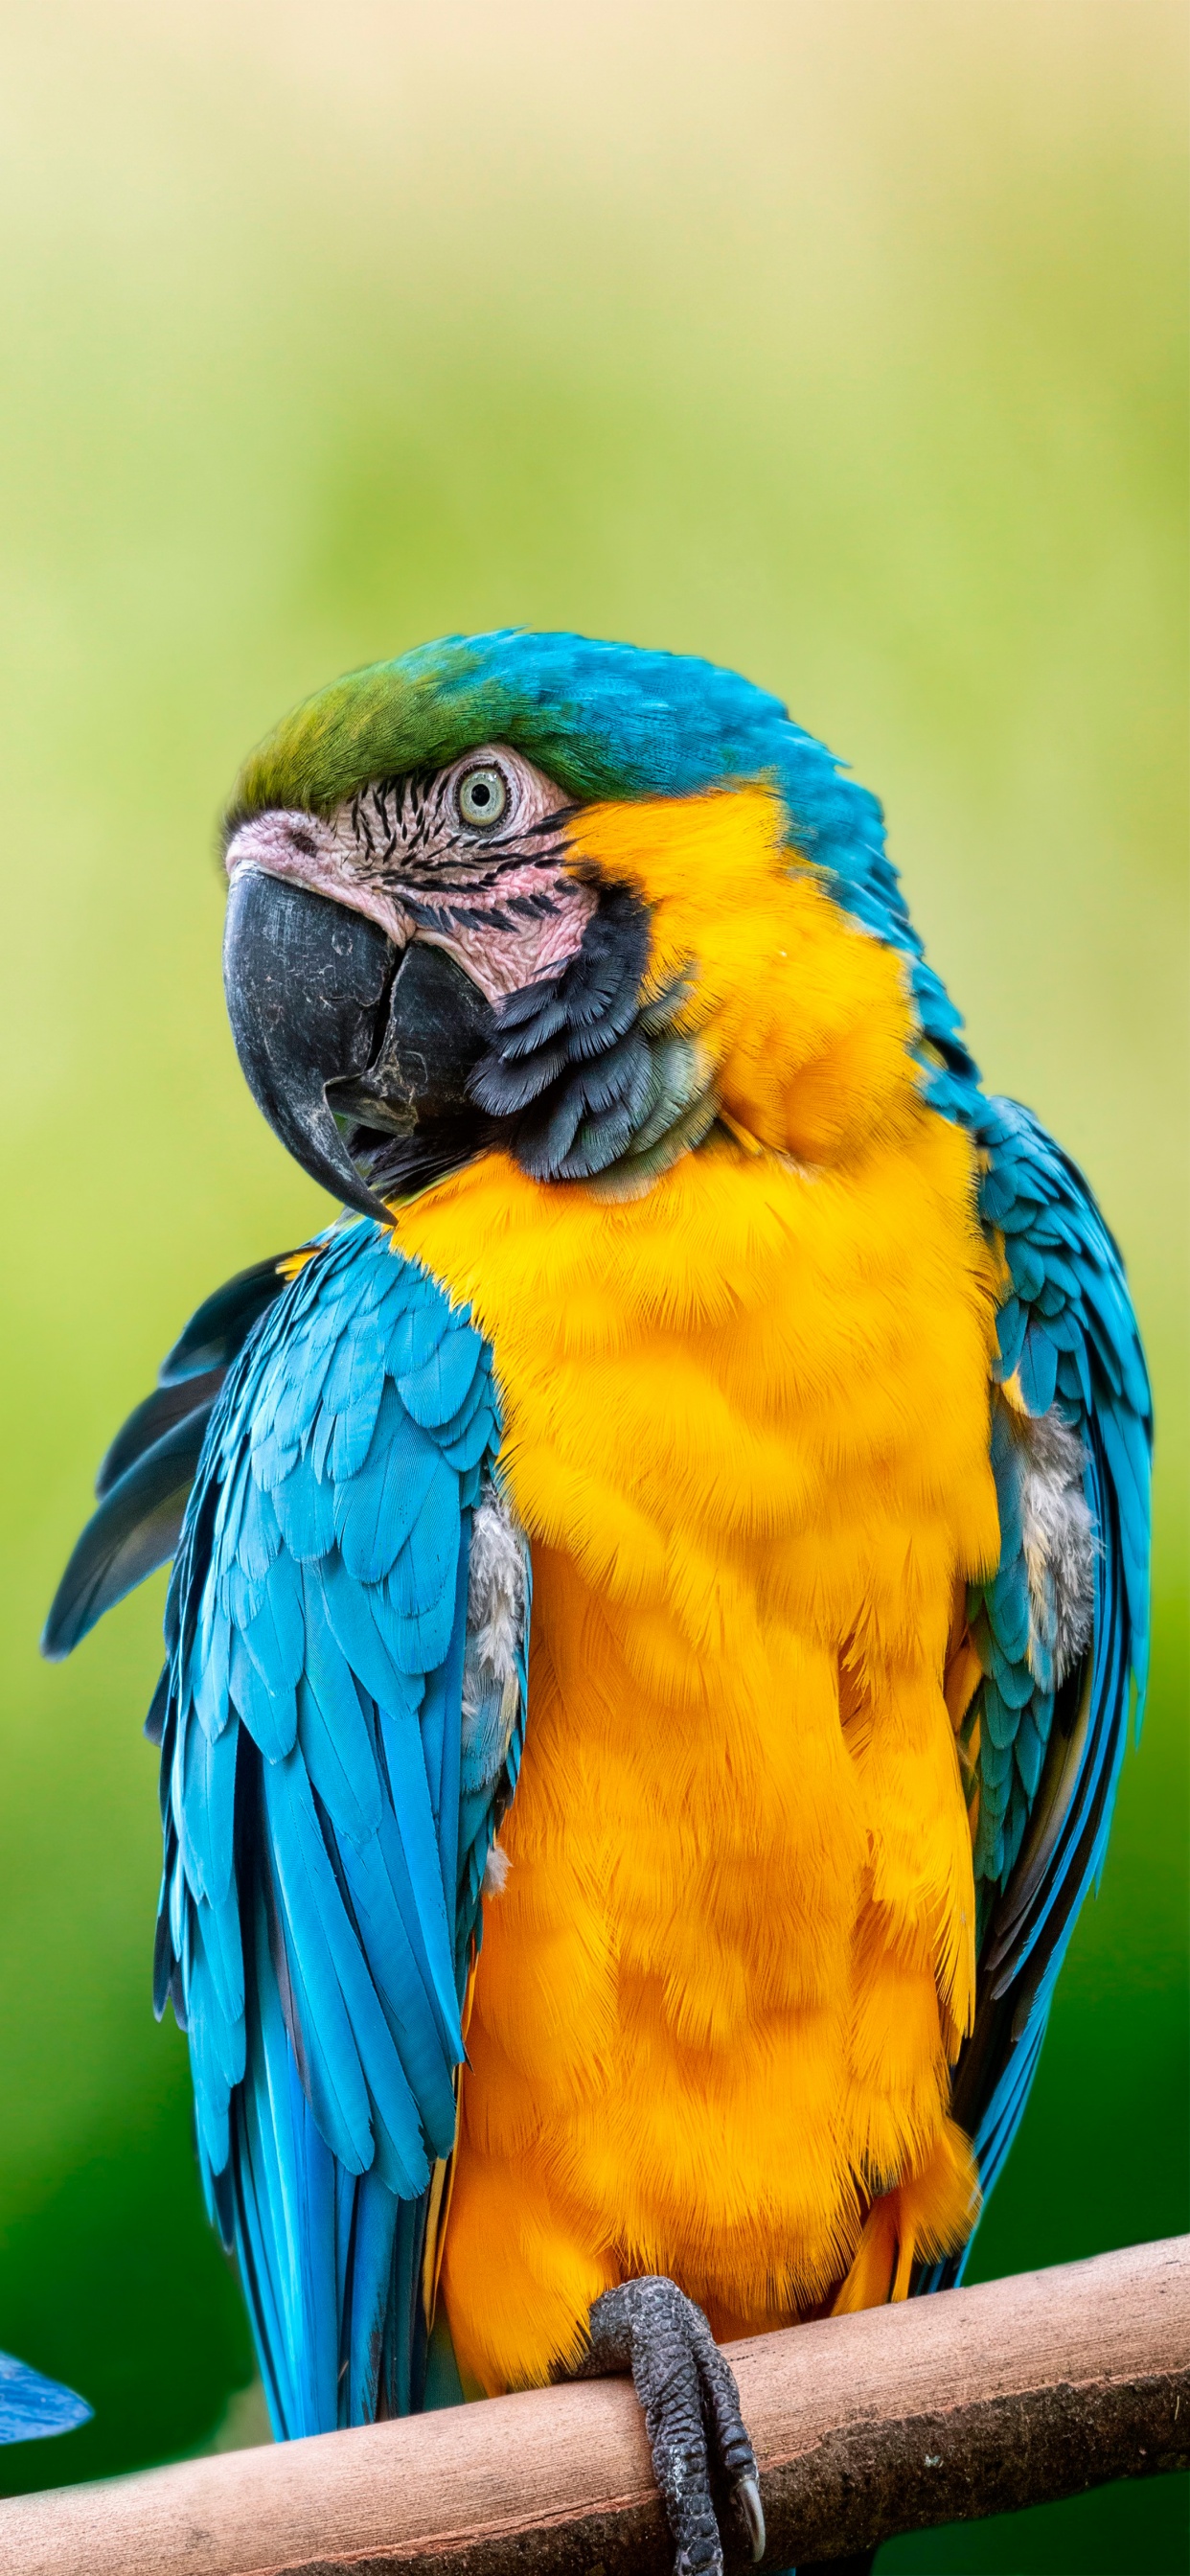 Hyacinth Macaw Parrot IPhone Wallpaper HD IPhone Wallpapers Wallpaper  Download  MOONAZ